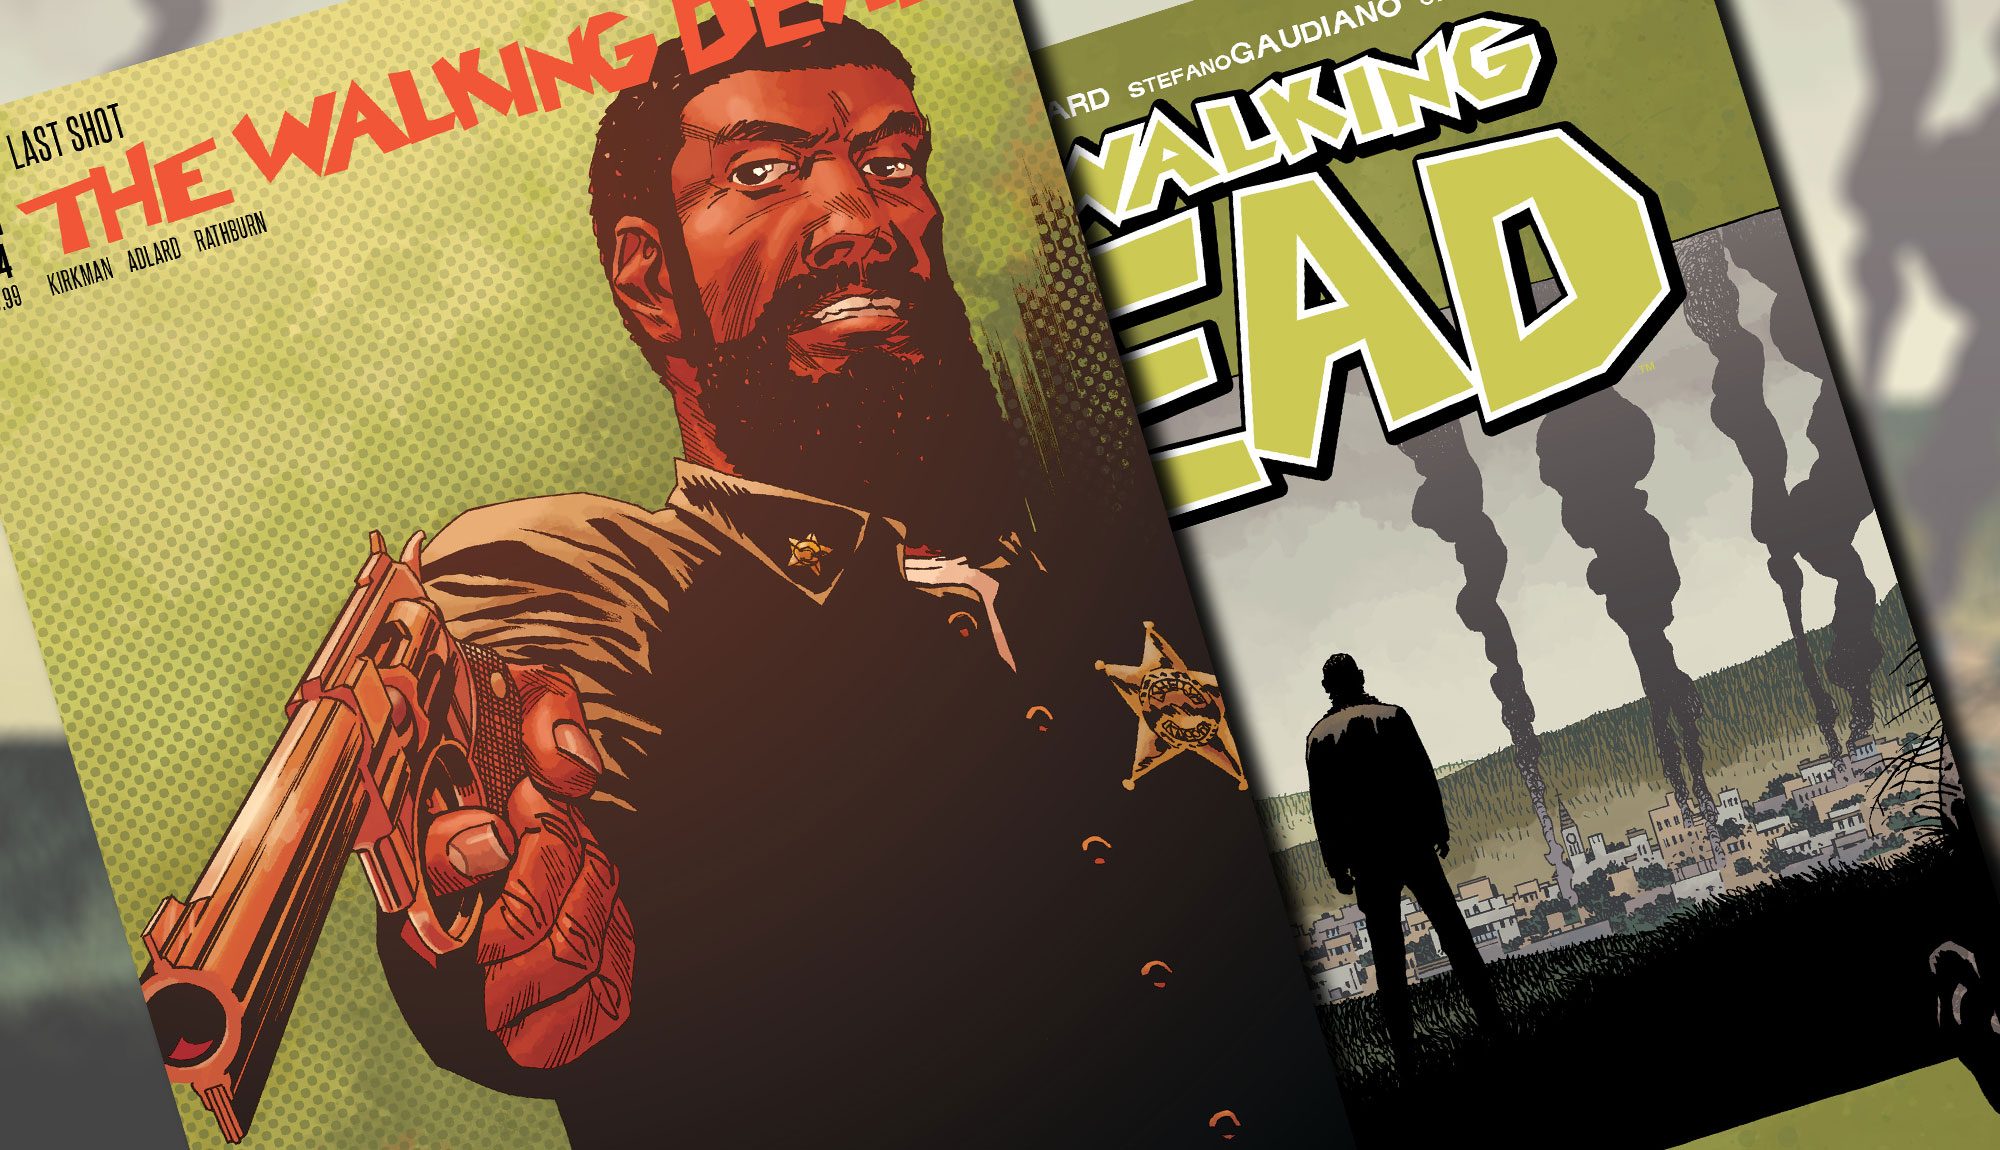 THE WALKING DEAD COMIC ISSUE 194 & VOLUME 32 COVERS REVEALED